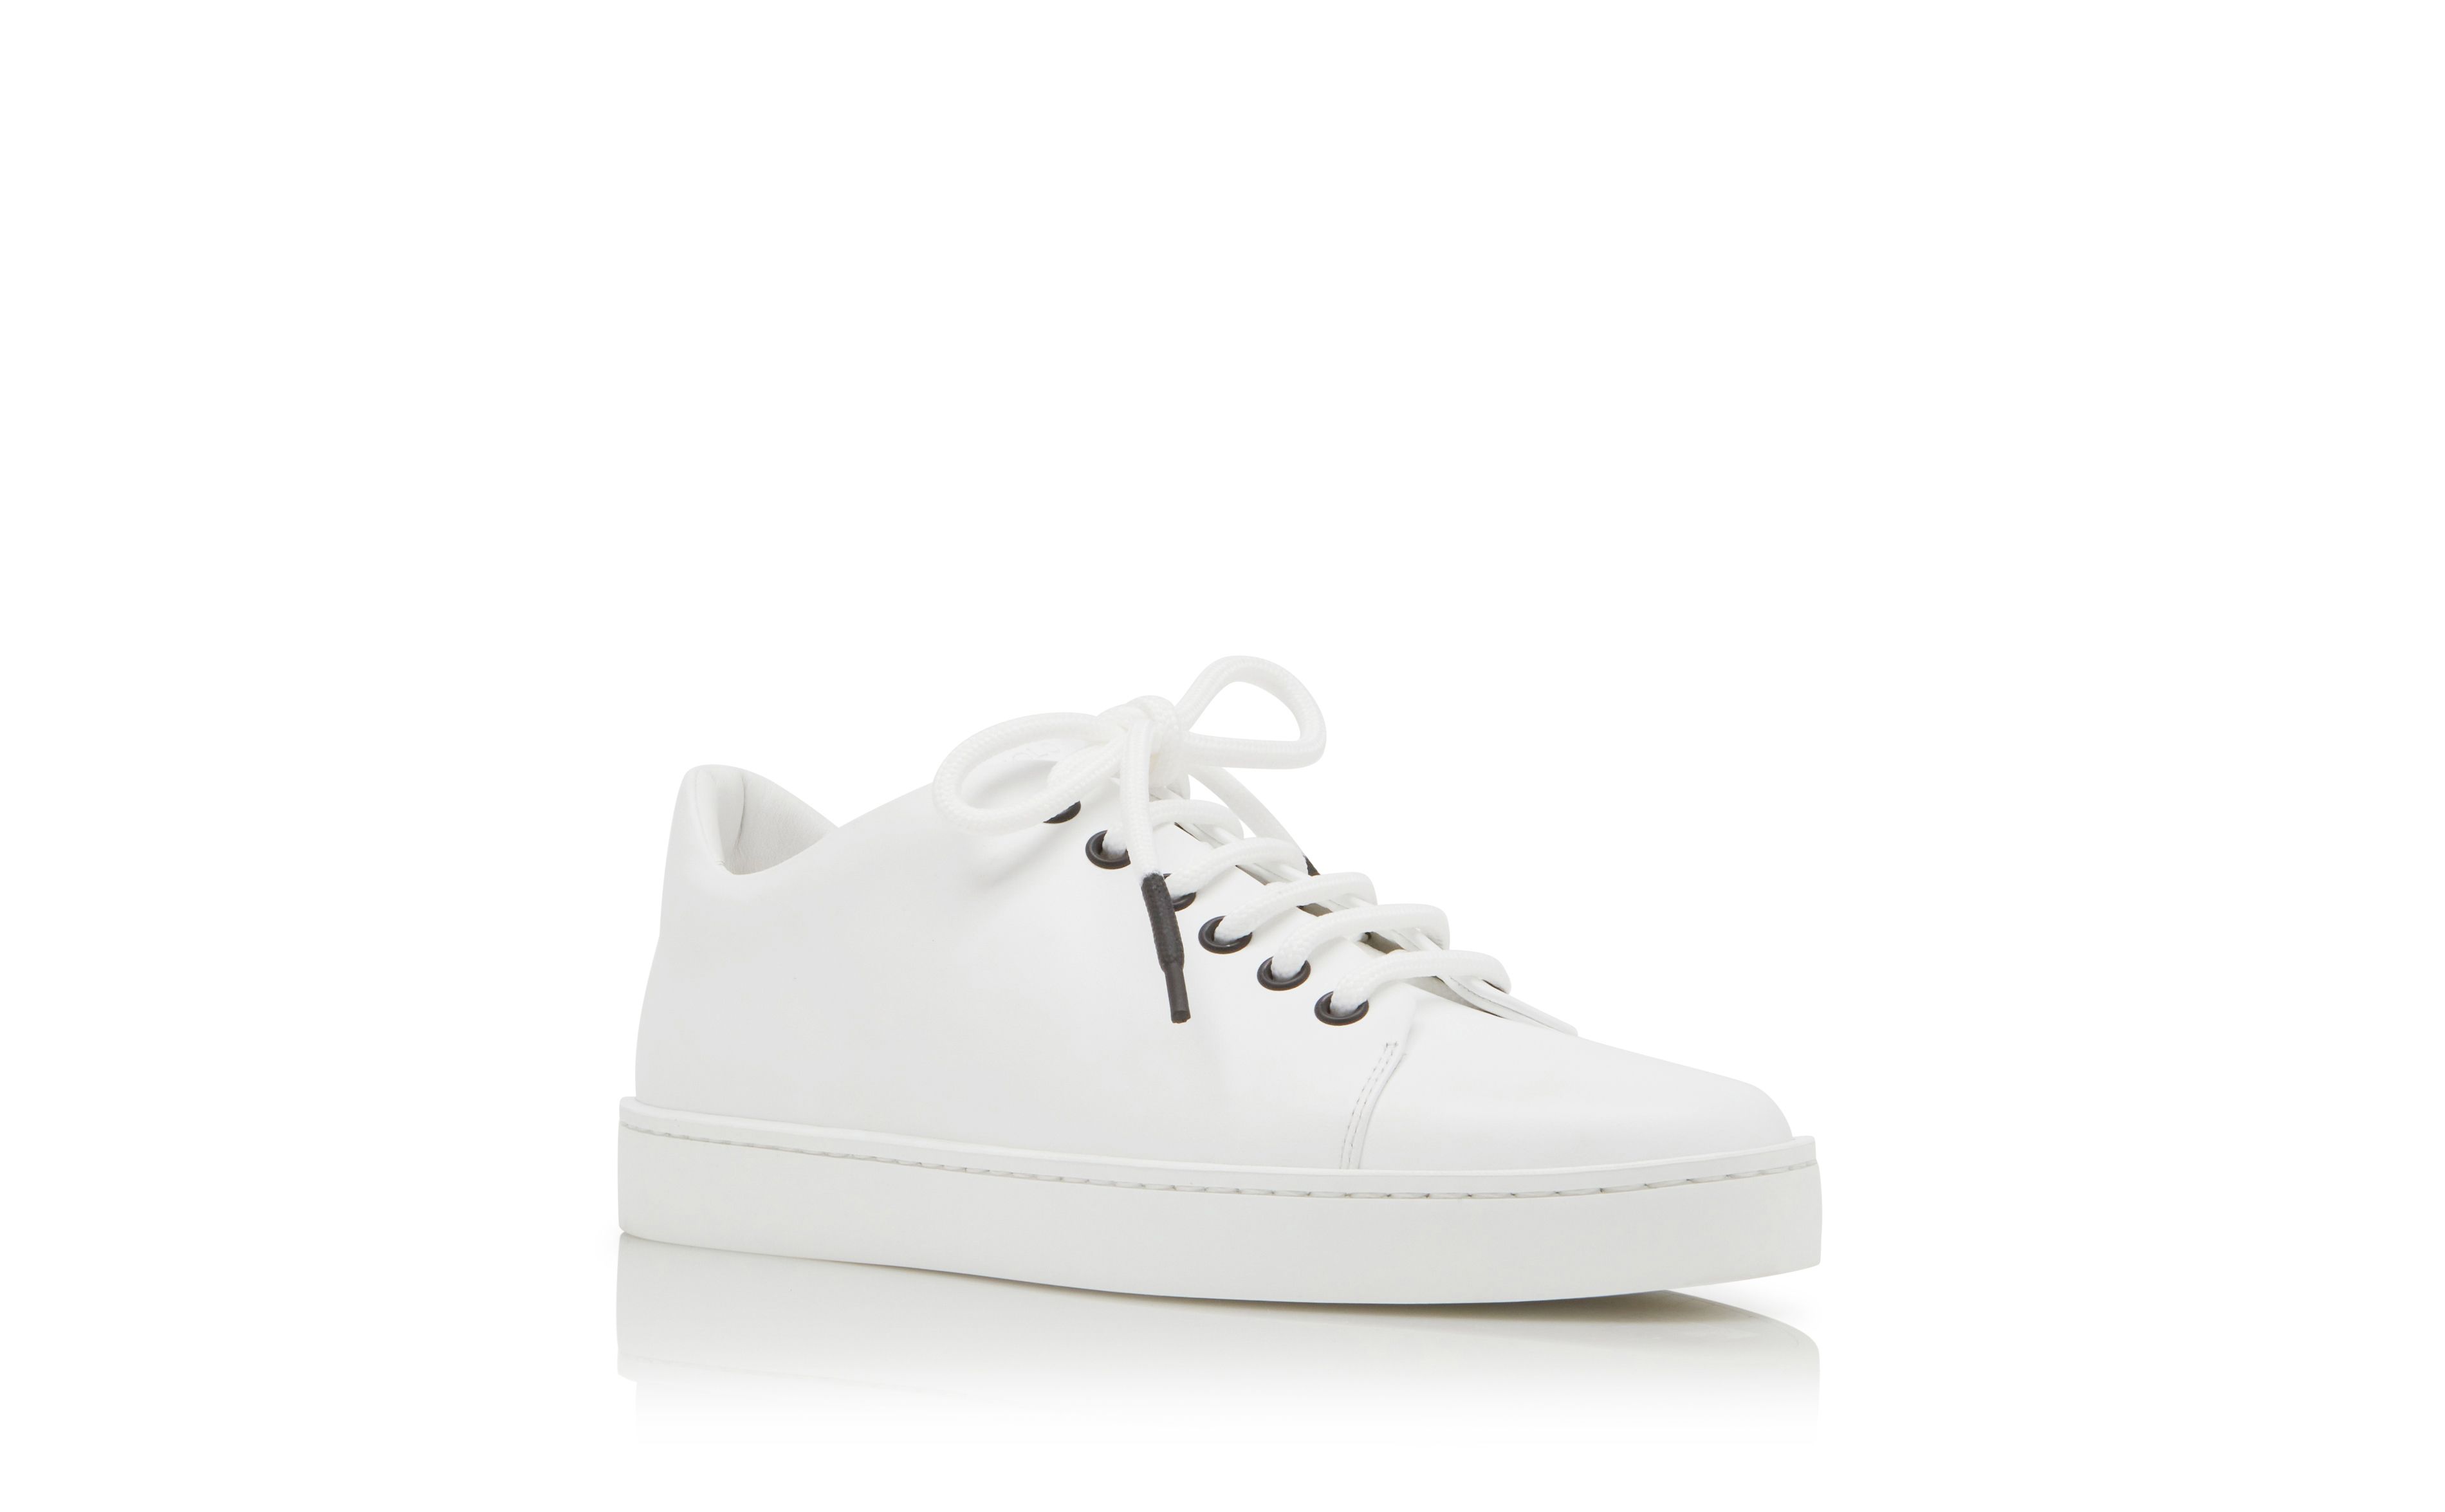 Designer White Calf Leather Low Cut Sneakers - Image Upsell